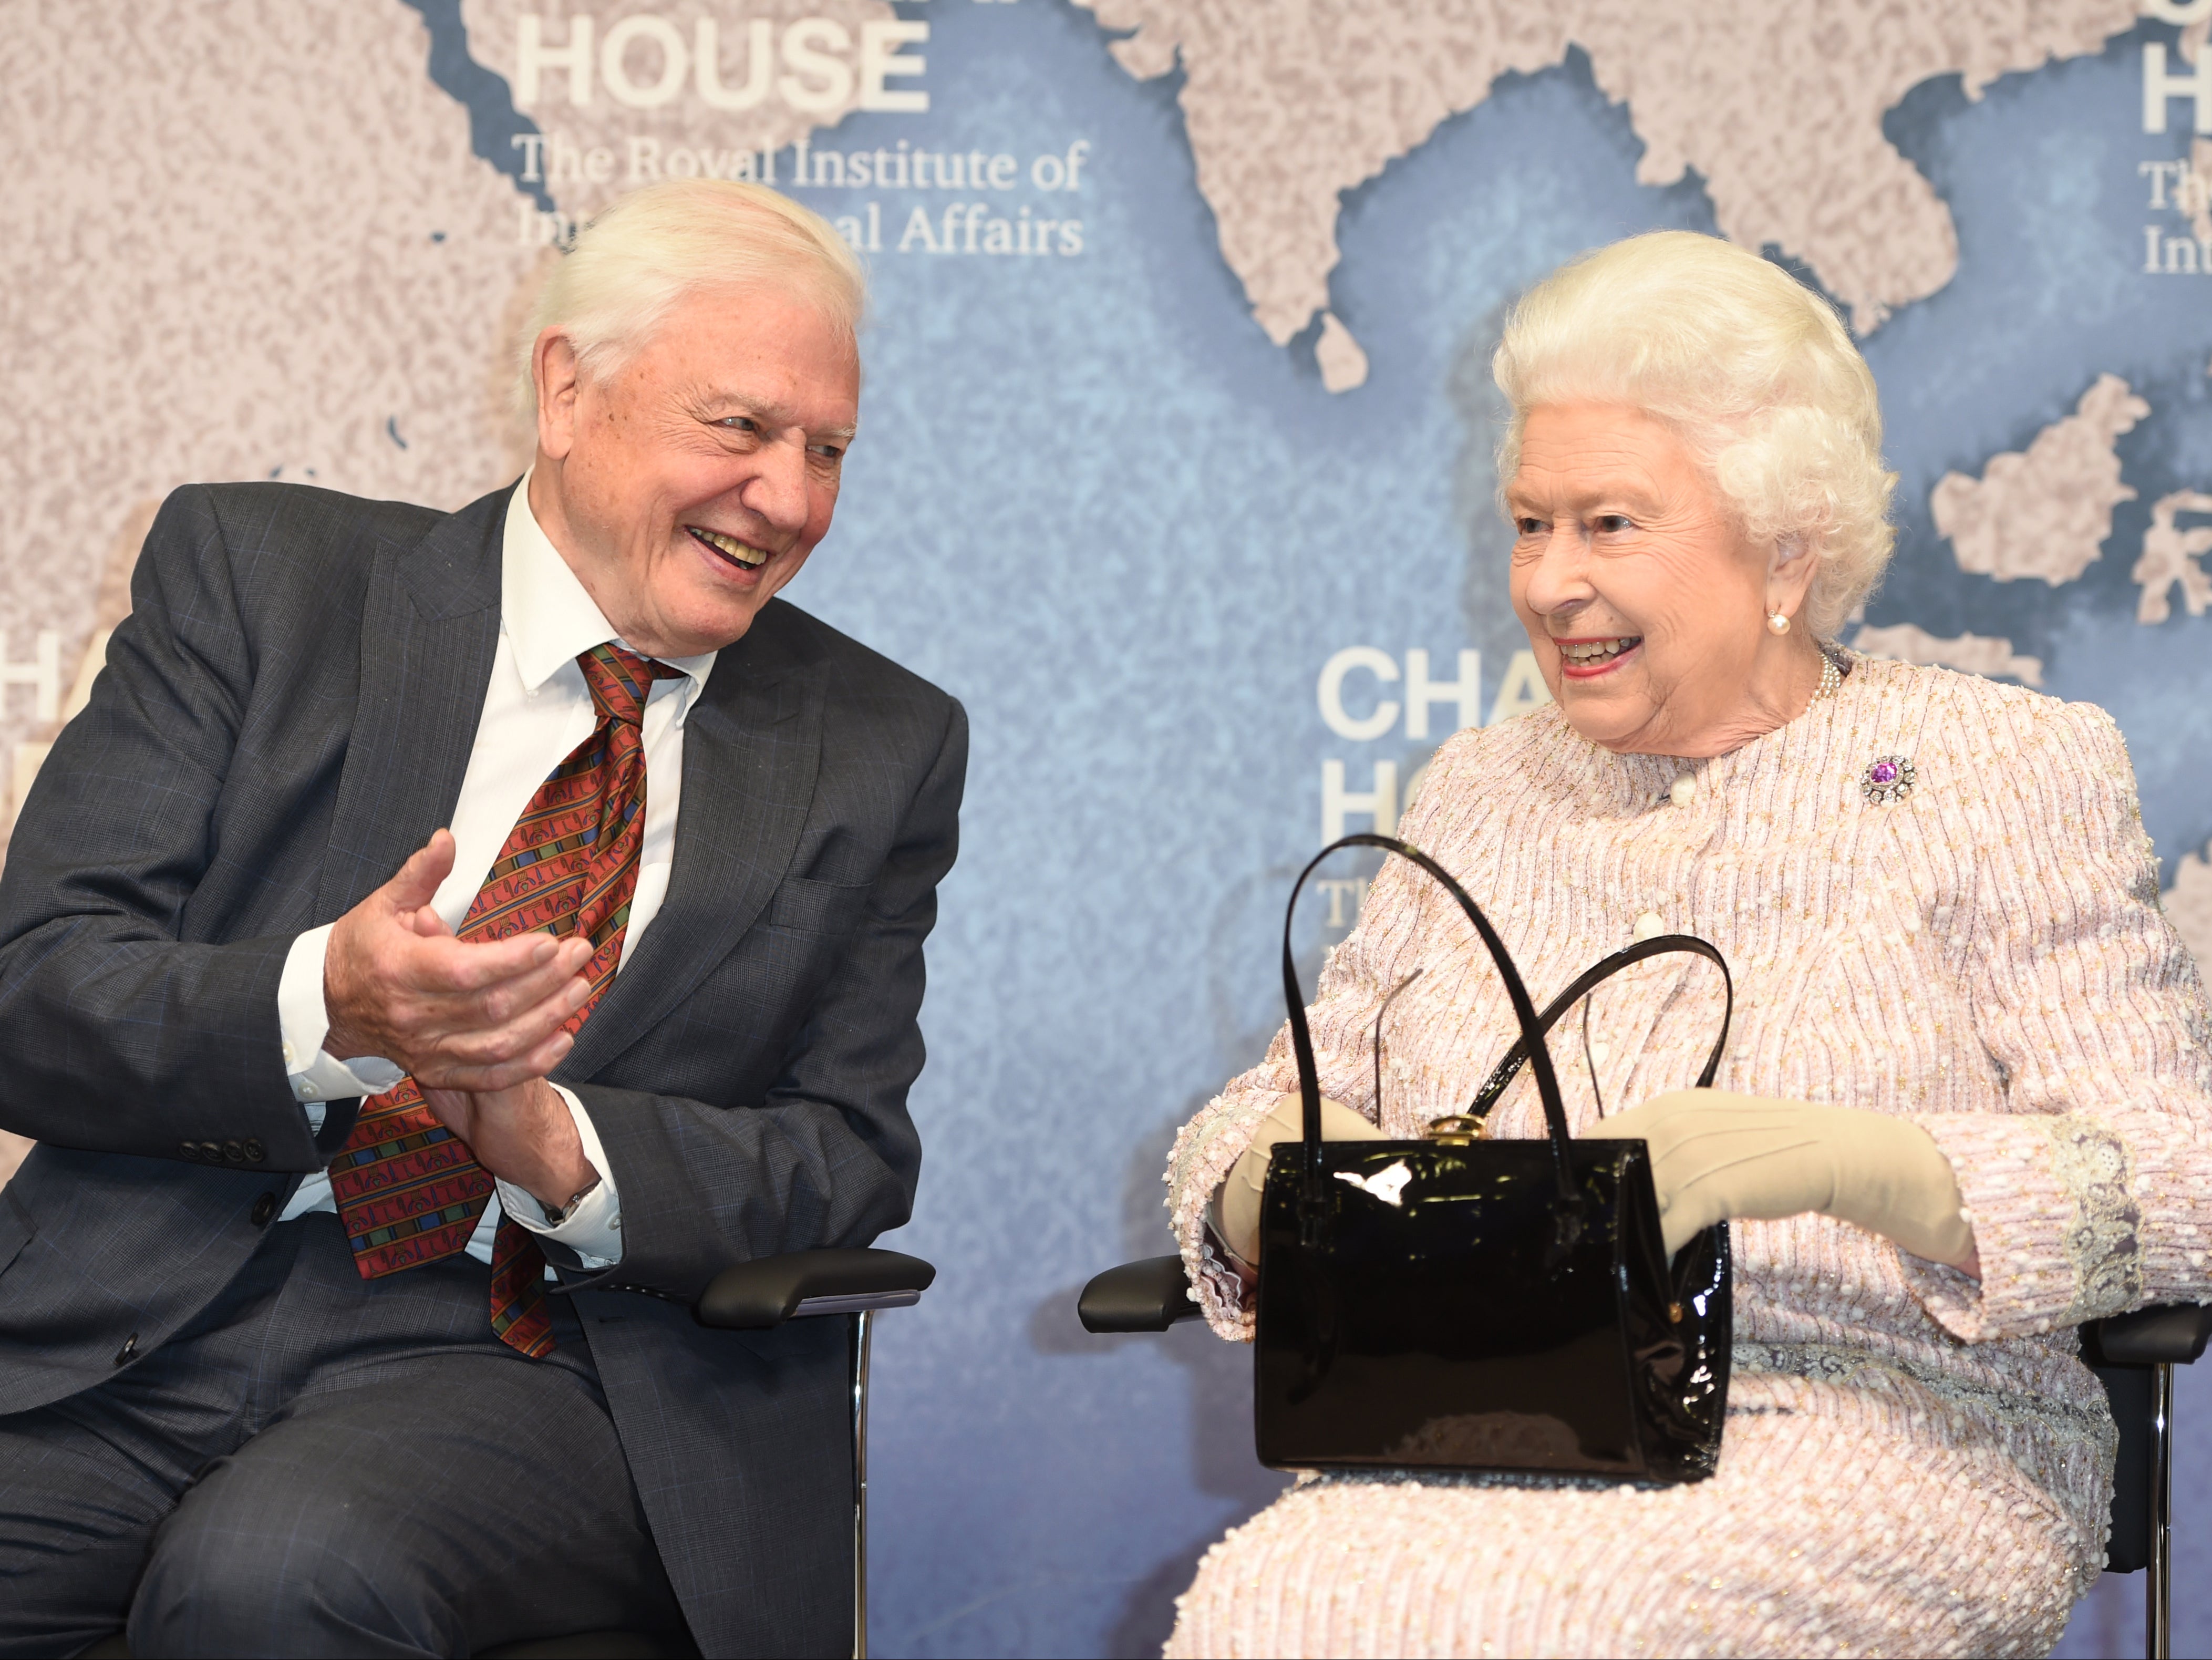 David Attenborough, pictured here with the Queen in 2019, shared similar sentiments about the late royal